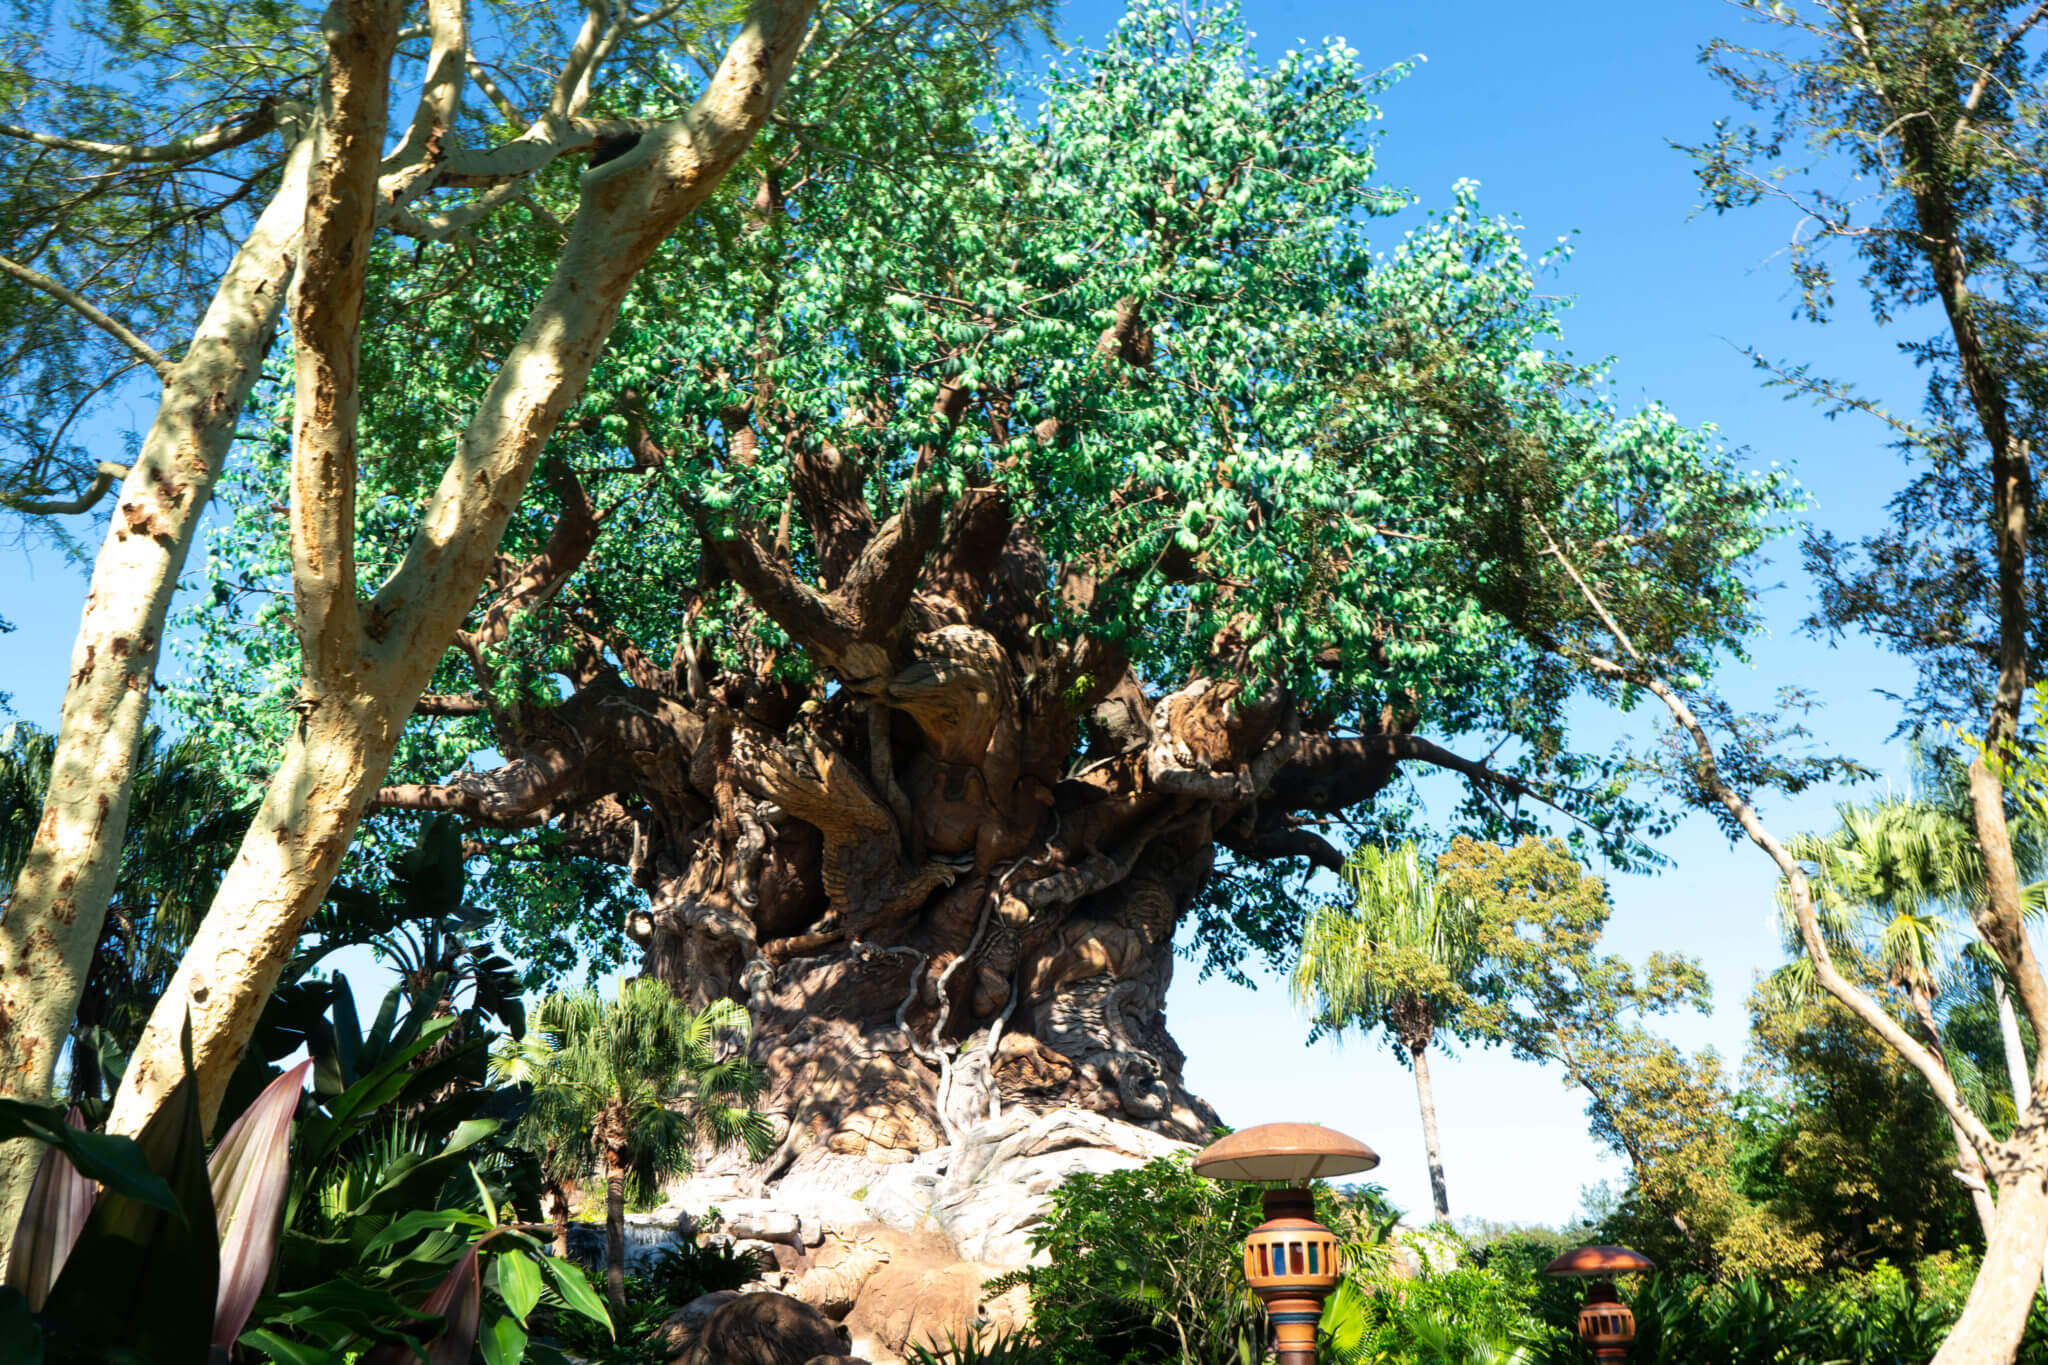 15 Simple Ways to Save Money on Your Disney World Vacation